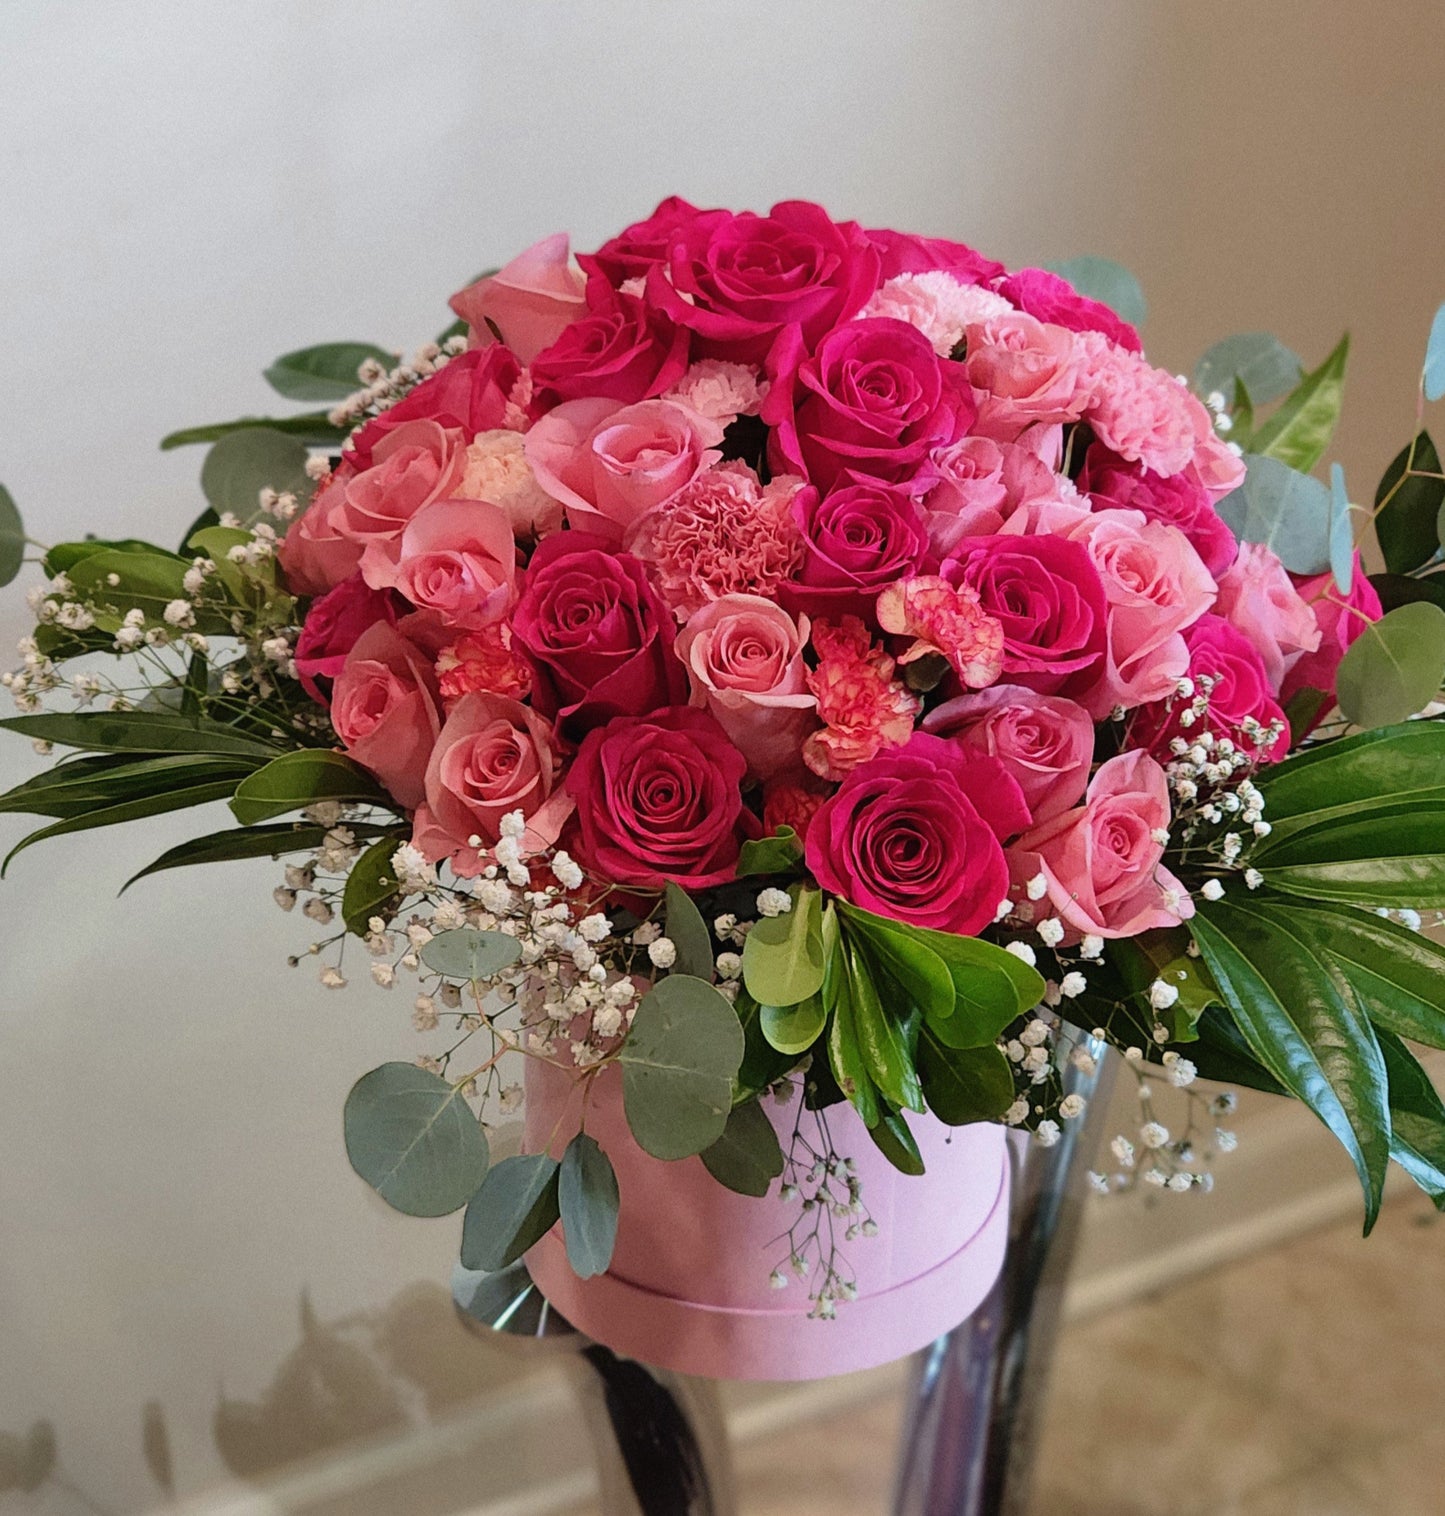 Pretty in pink - Beauty Flowers For You